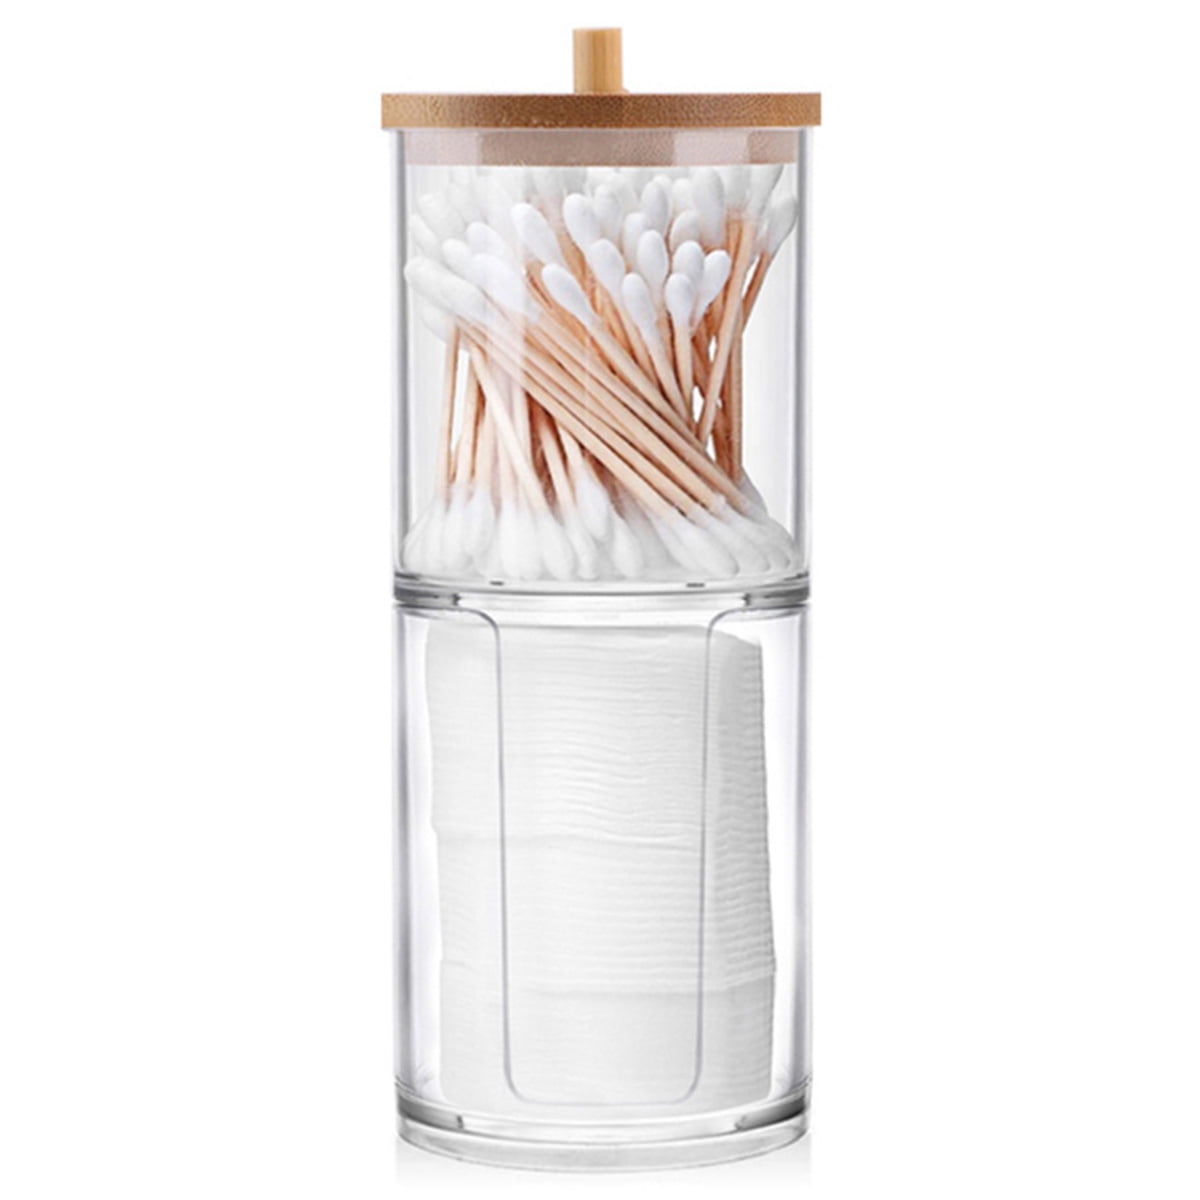 Sutowe Acrylic Paper Cup Dispenser with Bamboo Lid Clear Paper Cup Holder 2 In 1 Round and Square Cotton Swabs Storage Box,2-in-1 Overlay Design